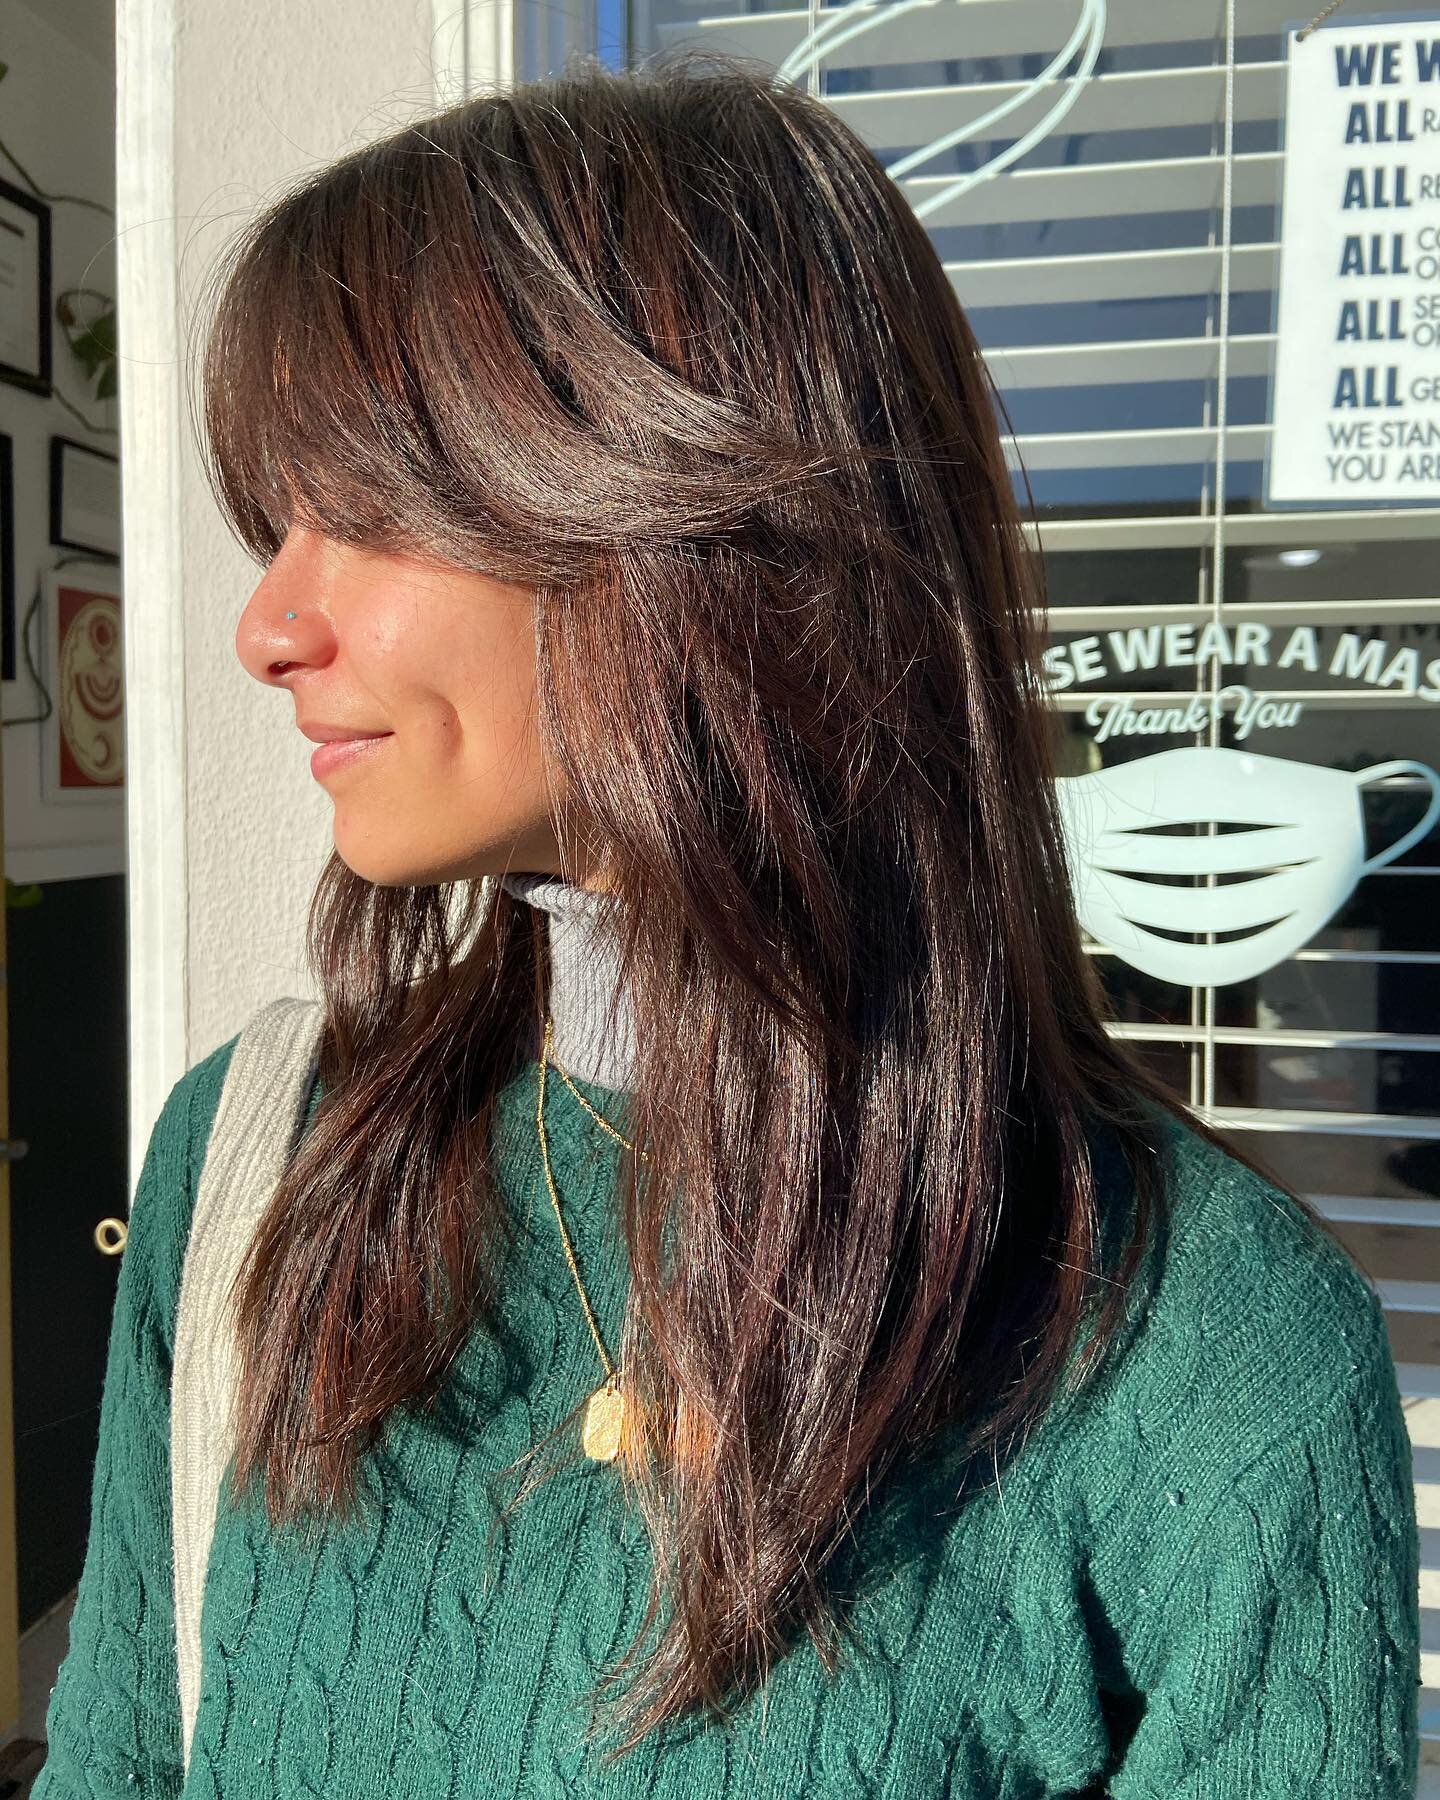 One of our New Years resolutions here at Tumbleweed is to share more of our work and more of our beautiful clients! This is a sweet one from today, a shaggy-ish shape. Nice soft layers to bring out some texture in her straight, thick hair and face fr